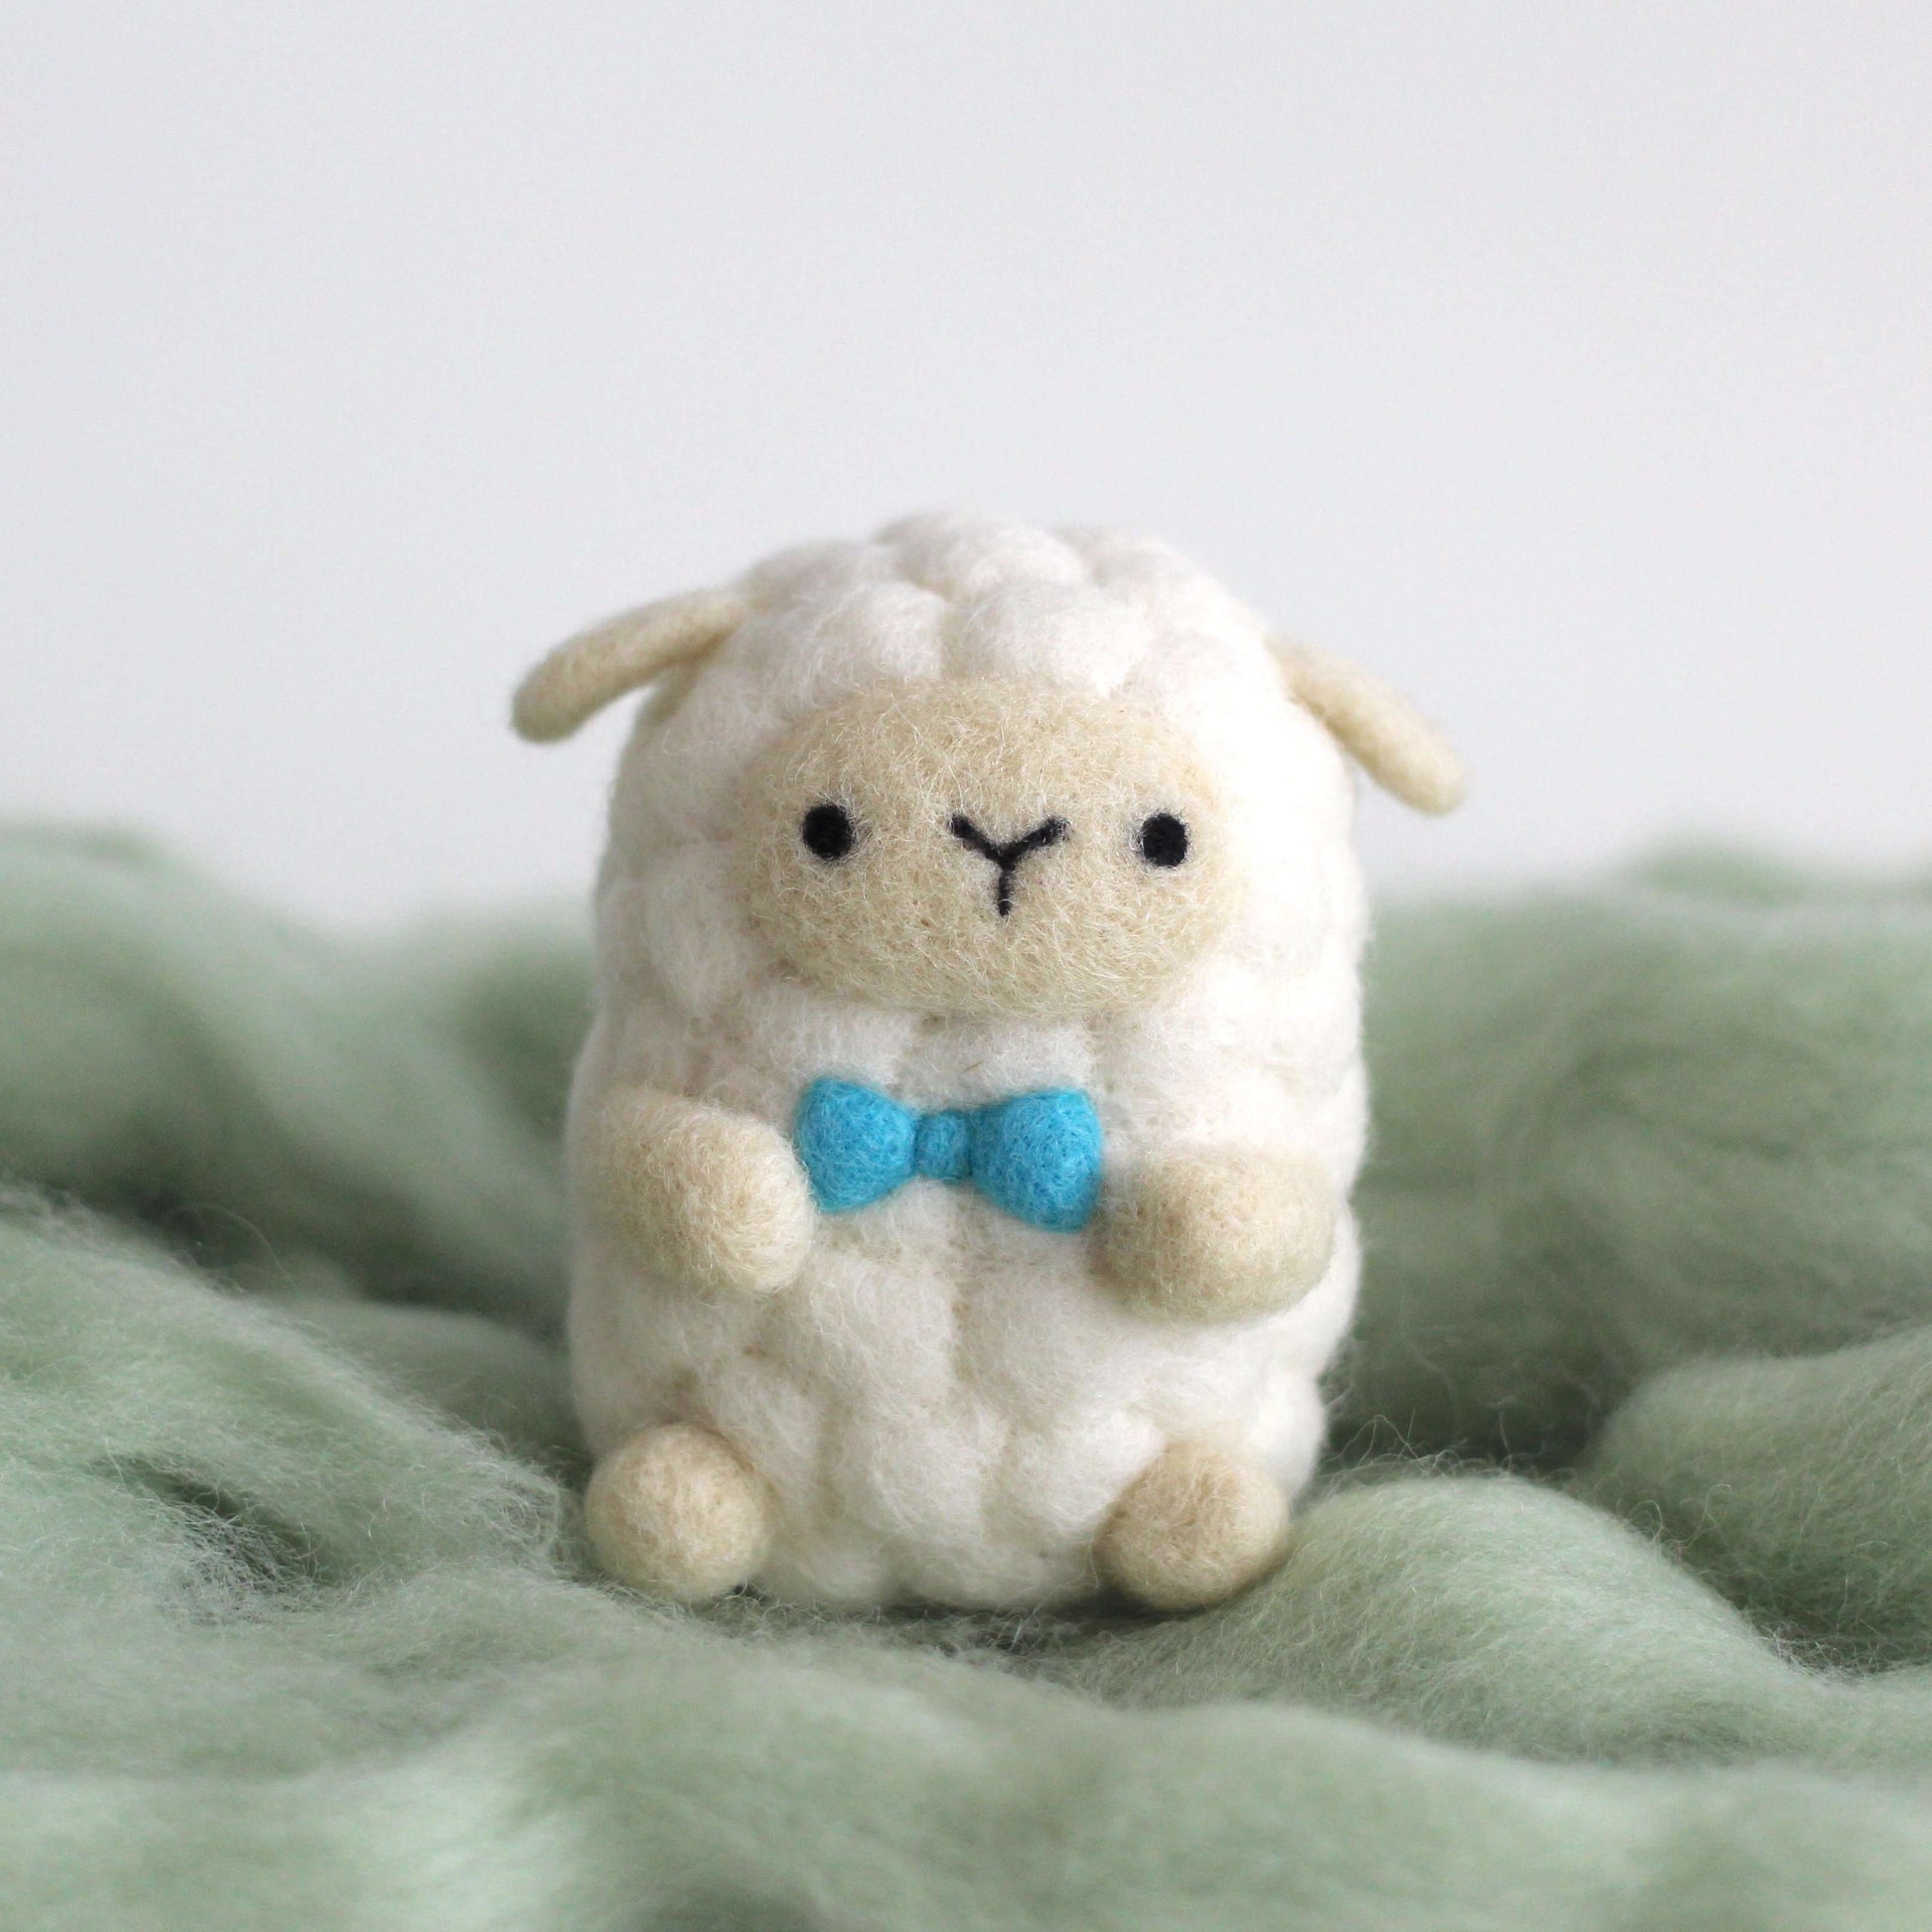 Needle Felted Sheep wearing Blue Bow Tie by Wild Whimsy Woolies